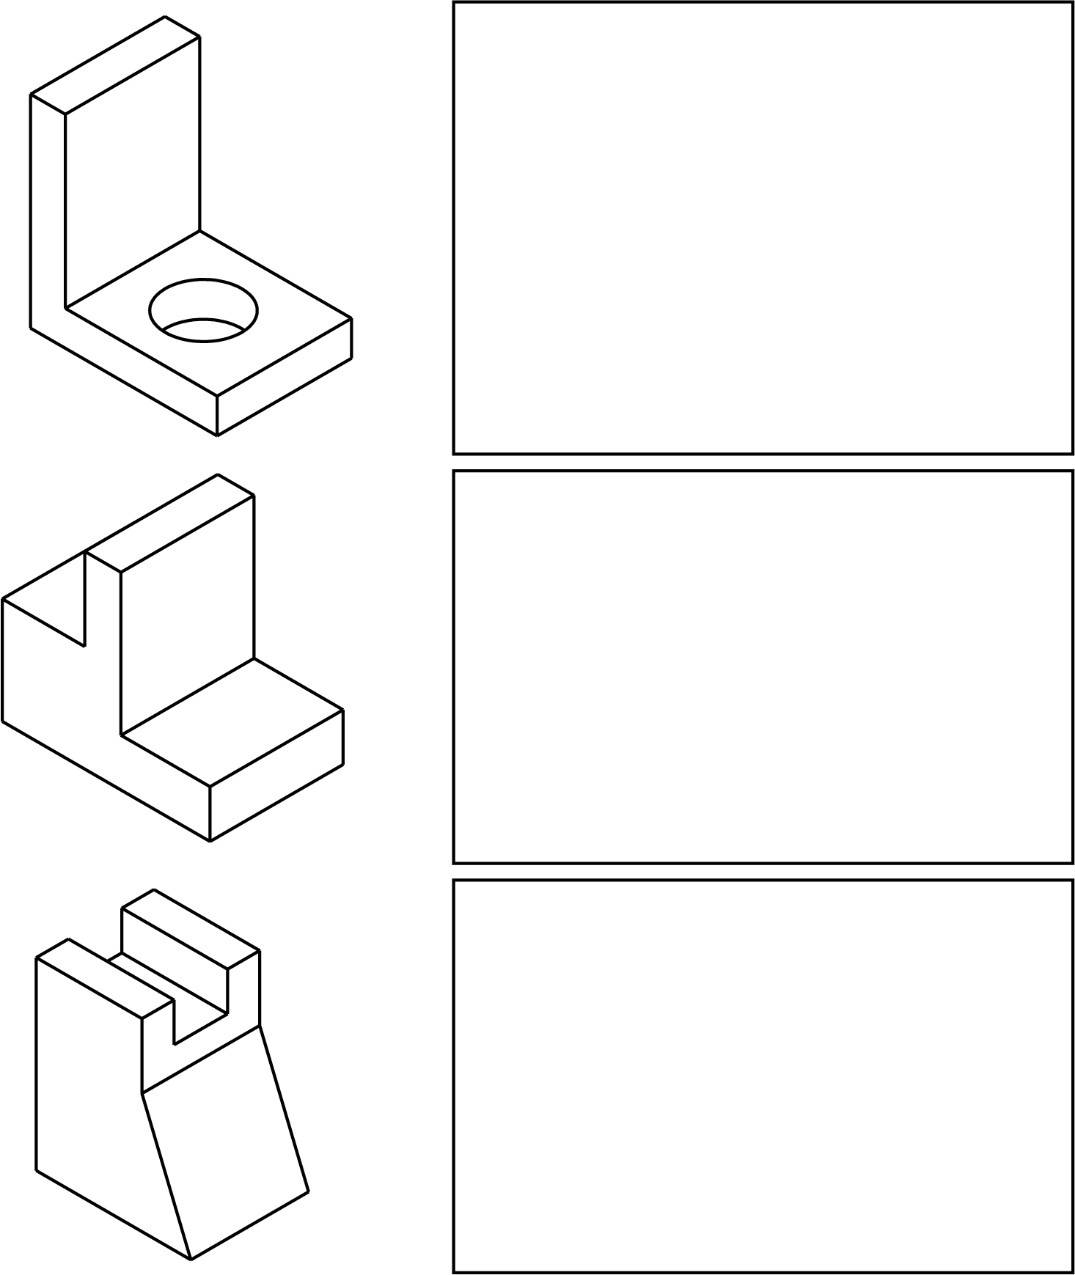 Isometric parts to sketch orthographic views.